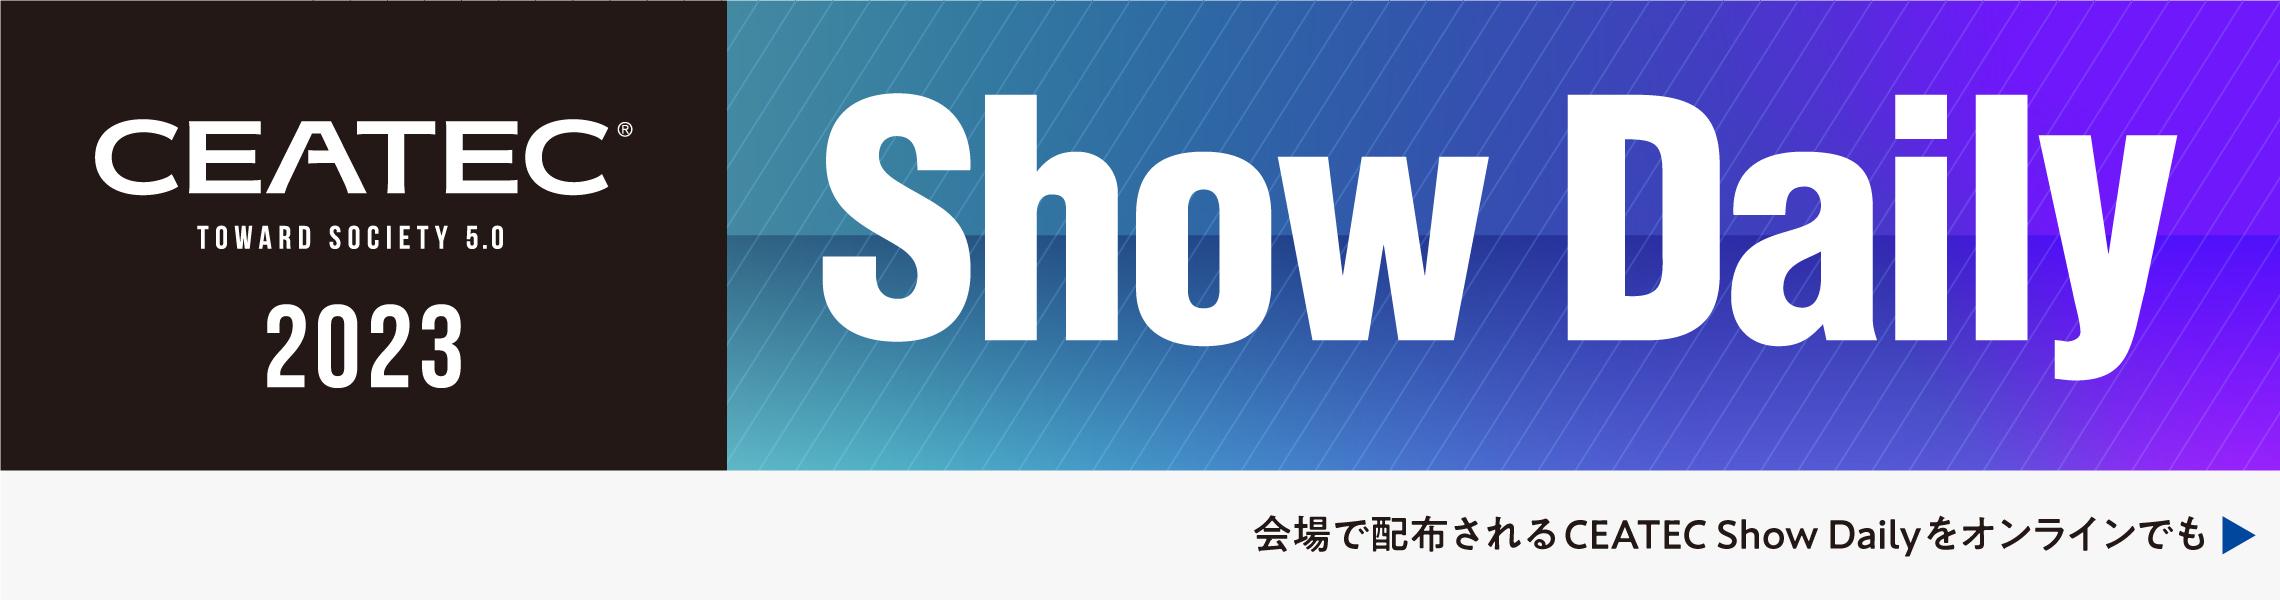 CEATEC2023 Show Daily